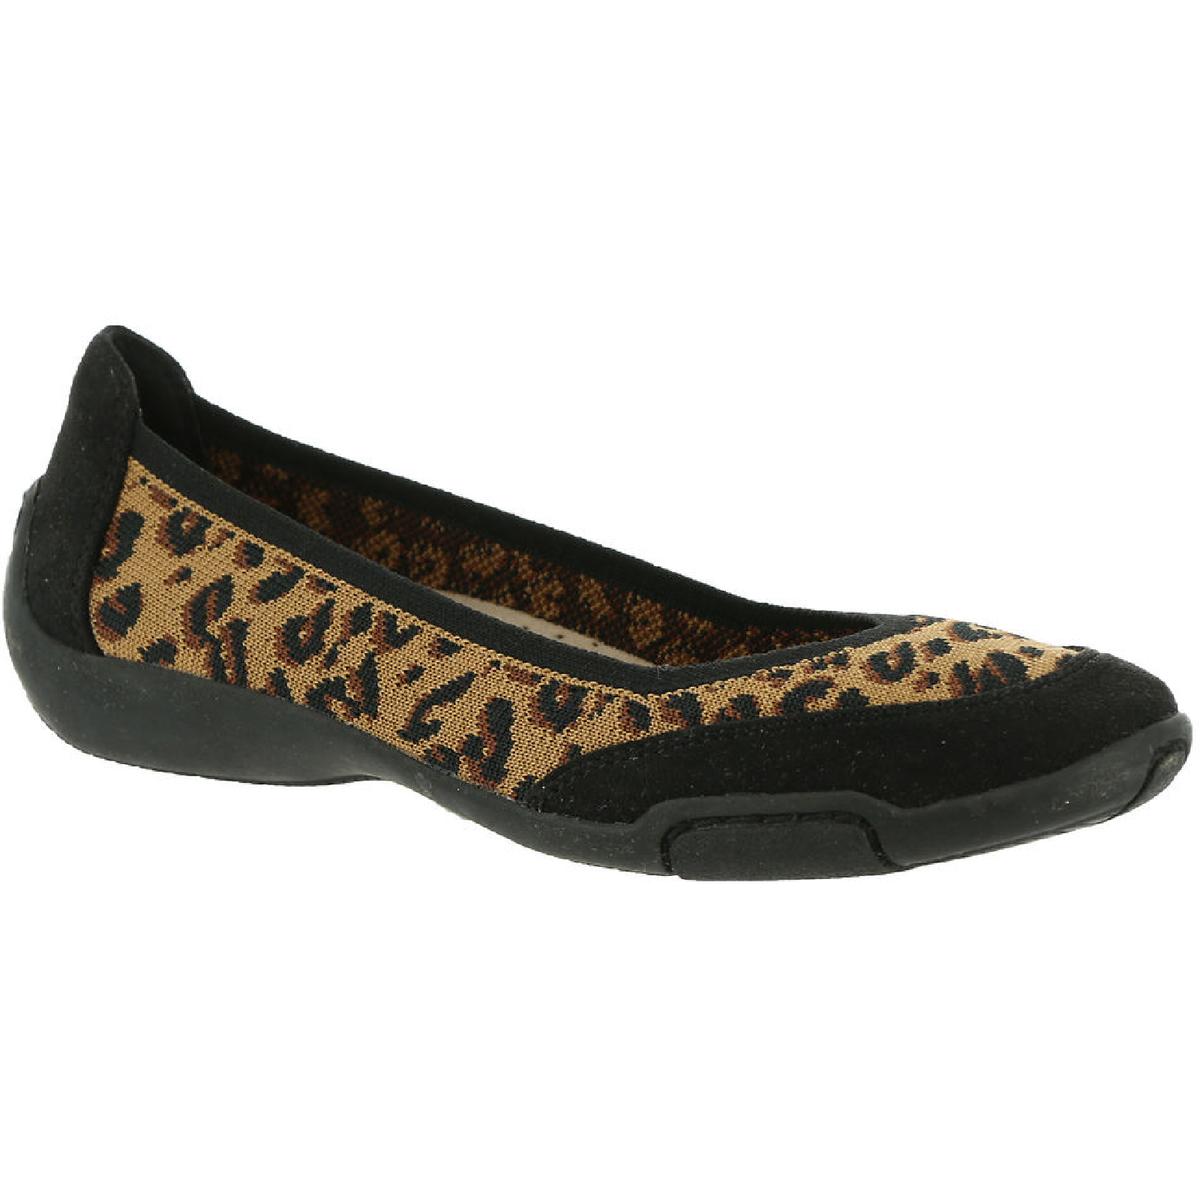 Selected Color is Leopard/Black